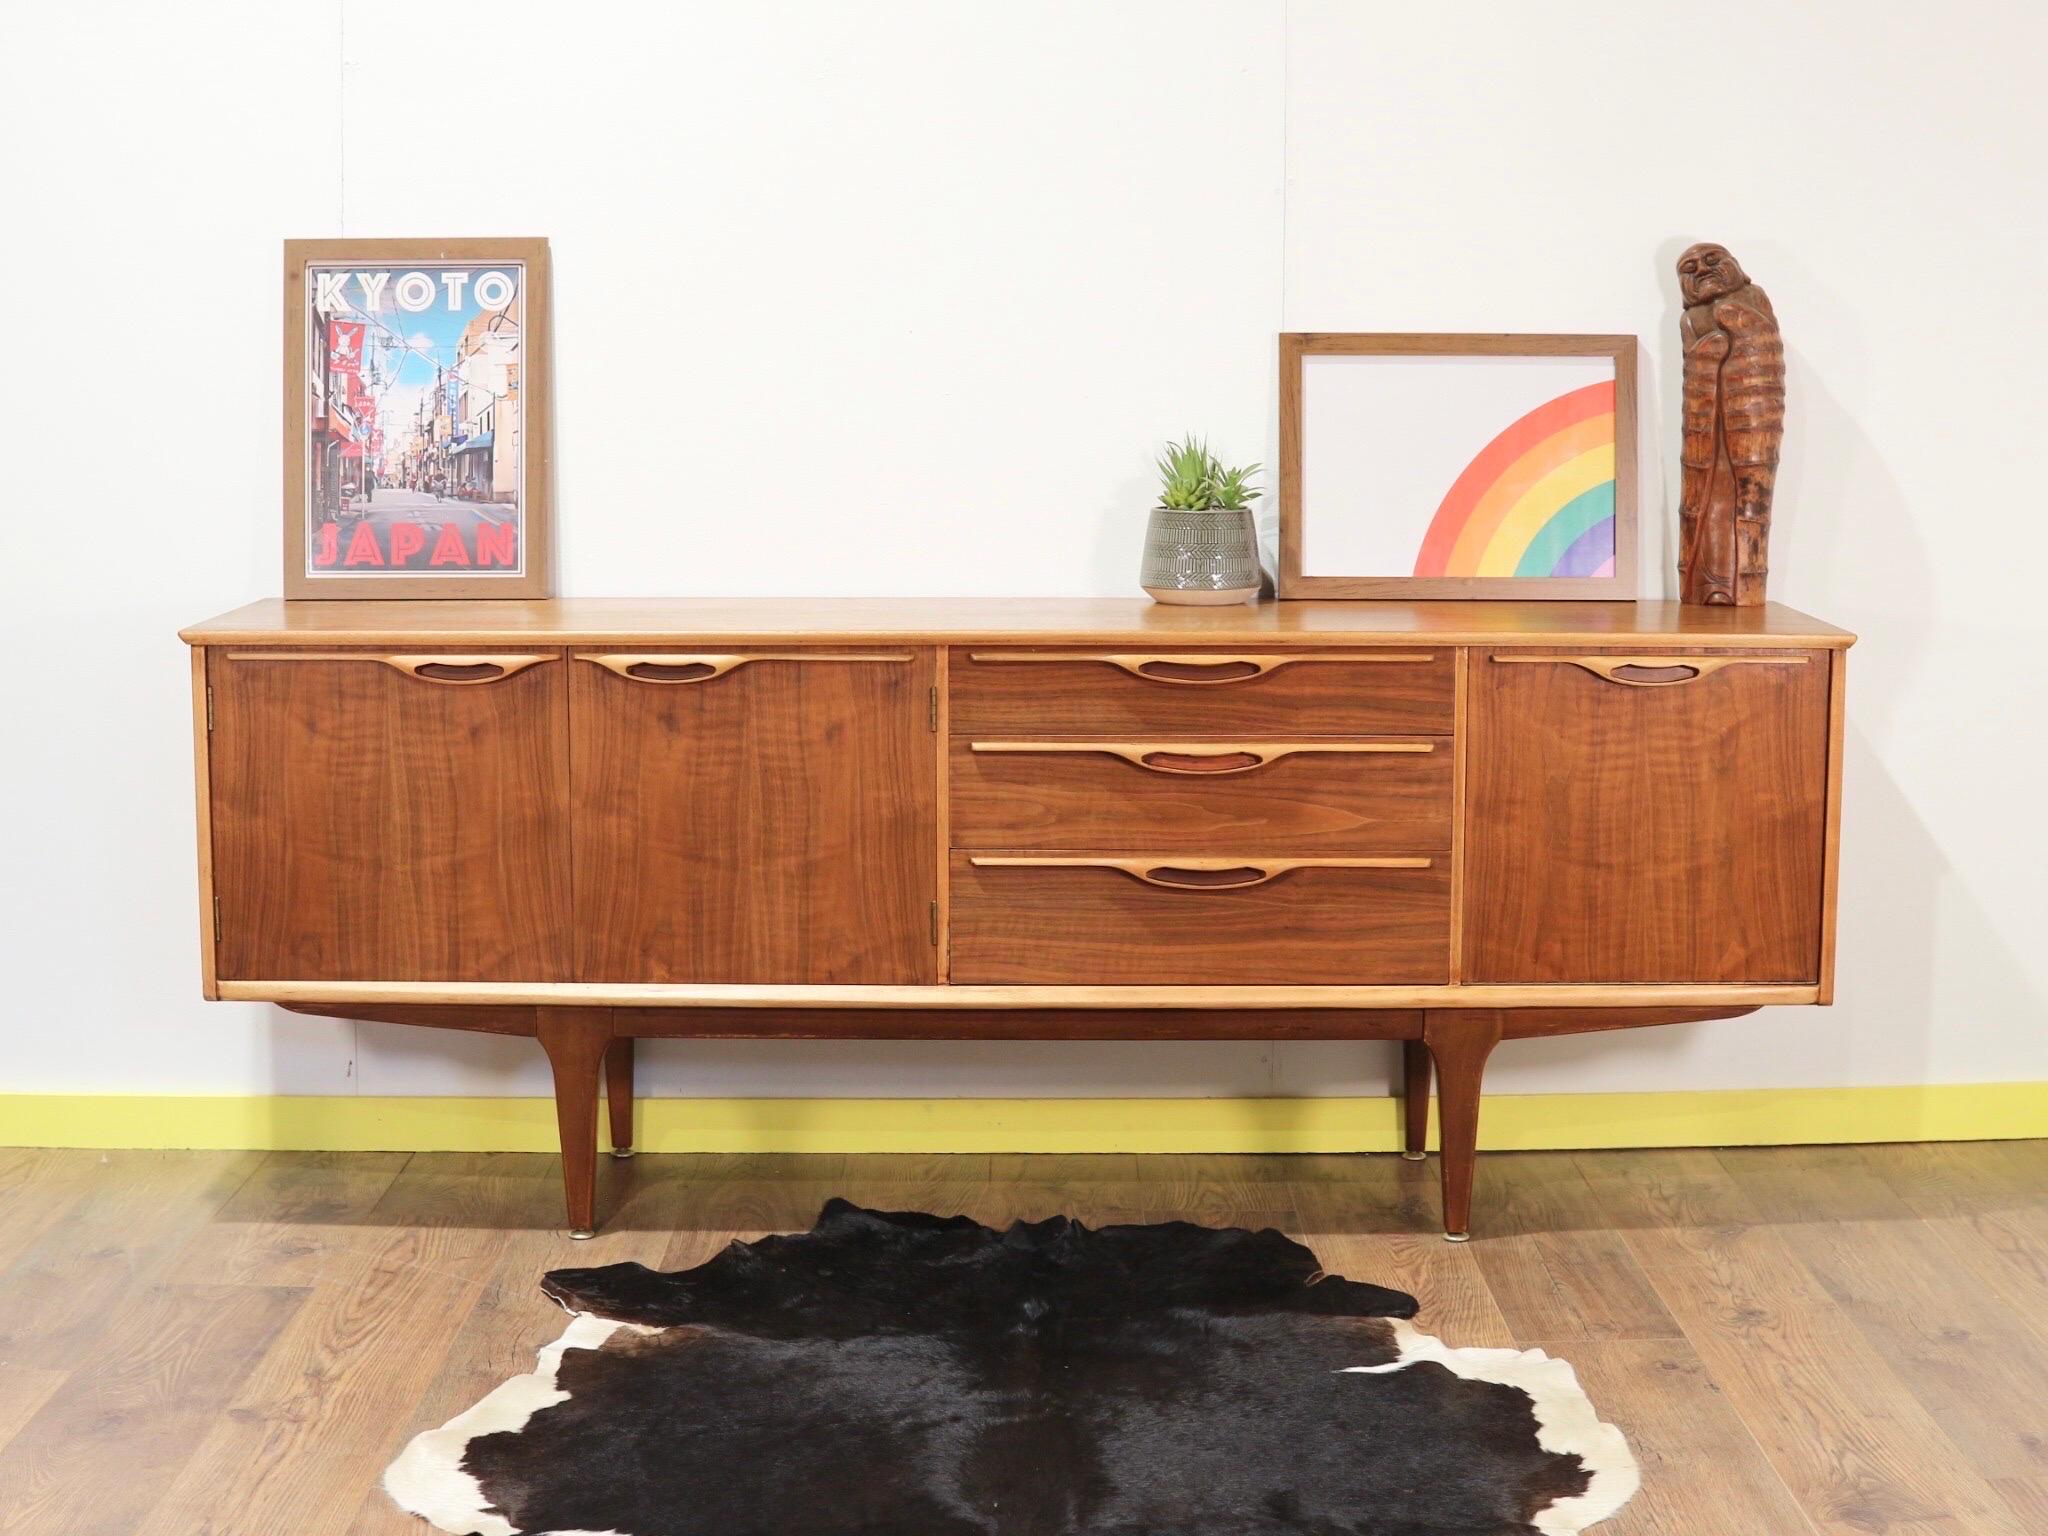 This stunning mid-century crednza was produced by Jentique in England during the 1950s1960s. It has fantastic grain with gorgeous handles to the drawers and flanking cabinet and drinks storage.

A real head turner this would look amazing in any